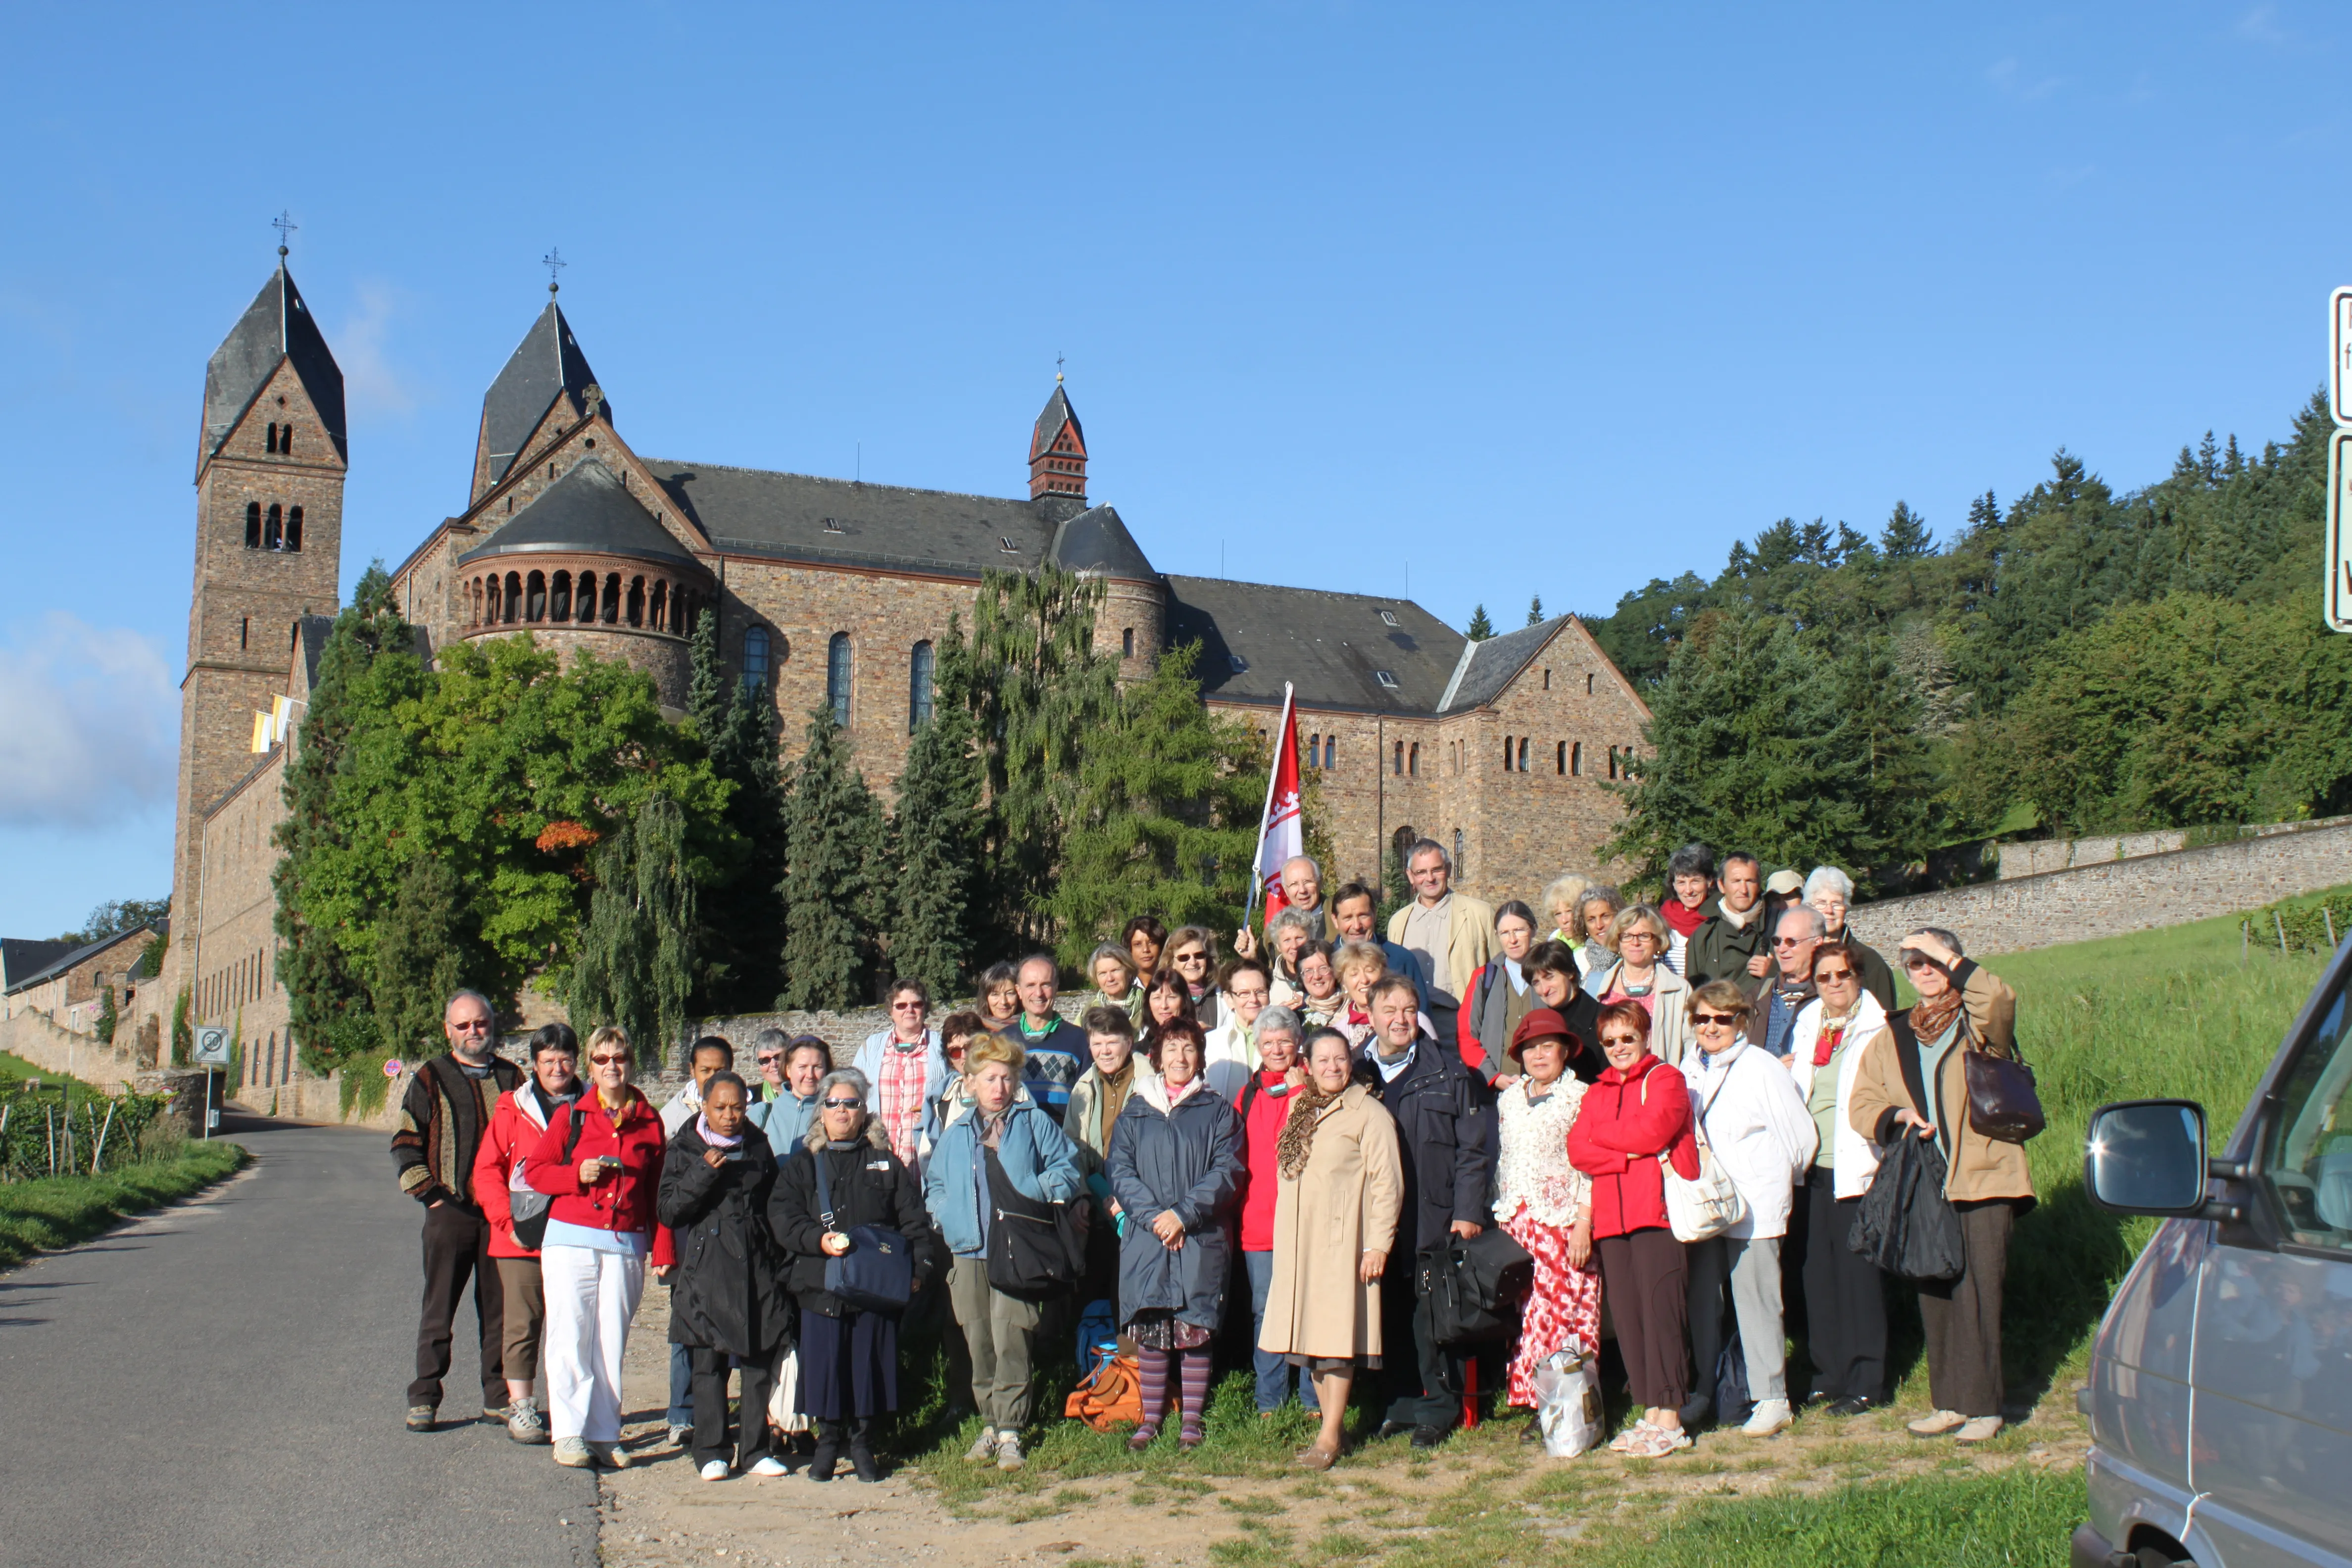 A group of pilgrims who followed the spiritual retreat with Claude and Marie France Delpech in front of St. Hildegard Abbey in Ebingen, Germany, Sept. 17, 2012.?w=200&h=150